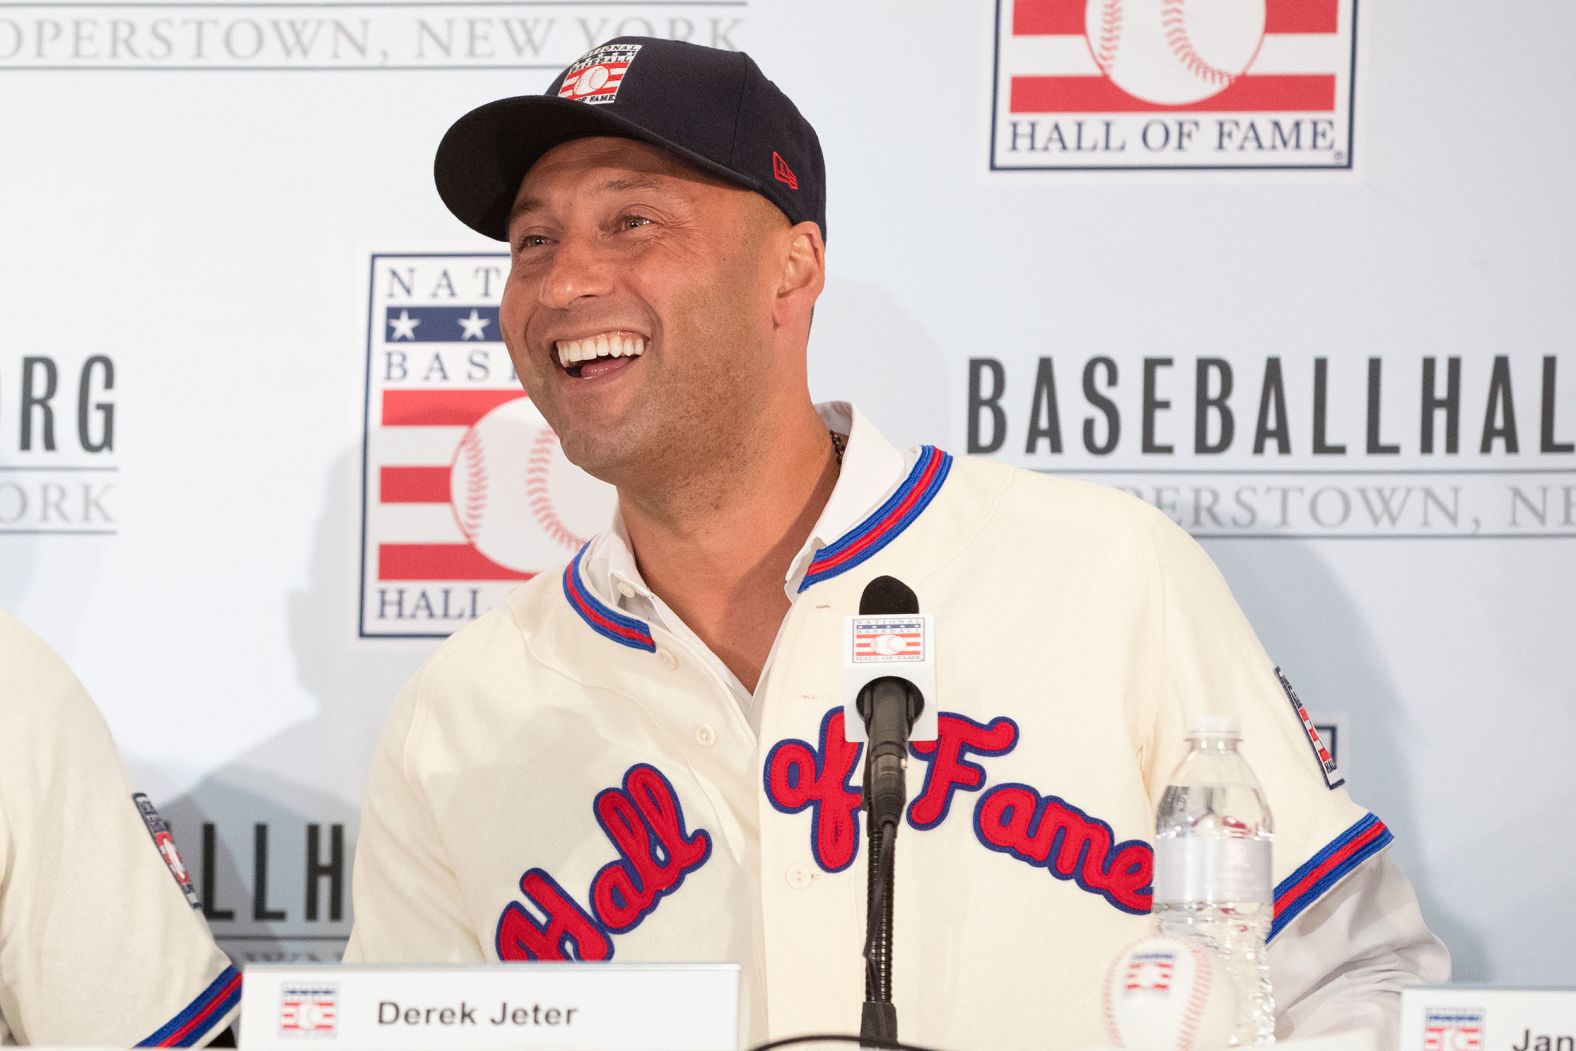 Jeter speaks to the media after it was announced that <a href="https://www.cnn.com/2020/01/21/us/baseball-hall-of-fame-elections-derek-jeter-larry-walker/index.html" target="_blank">he had been elected to the Baseball Hall of Fame</a> in 2020. He was one vote away from being the second player ever to be unanimously elected.